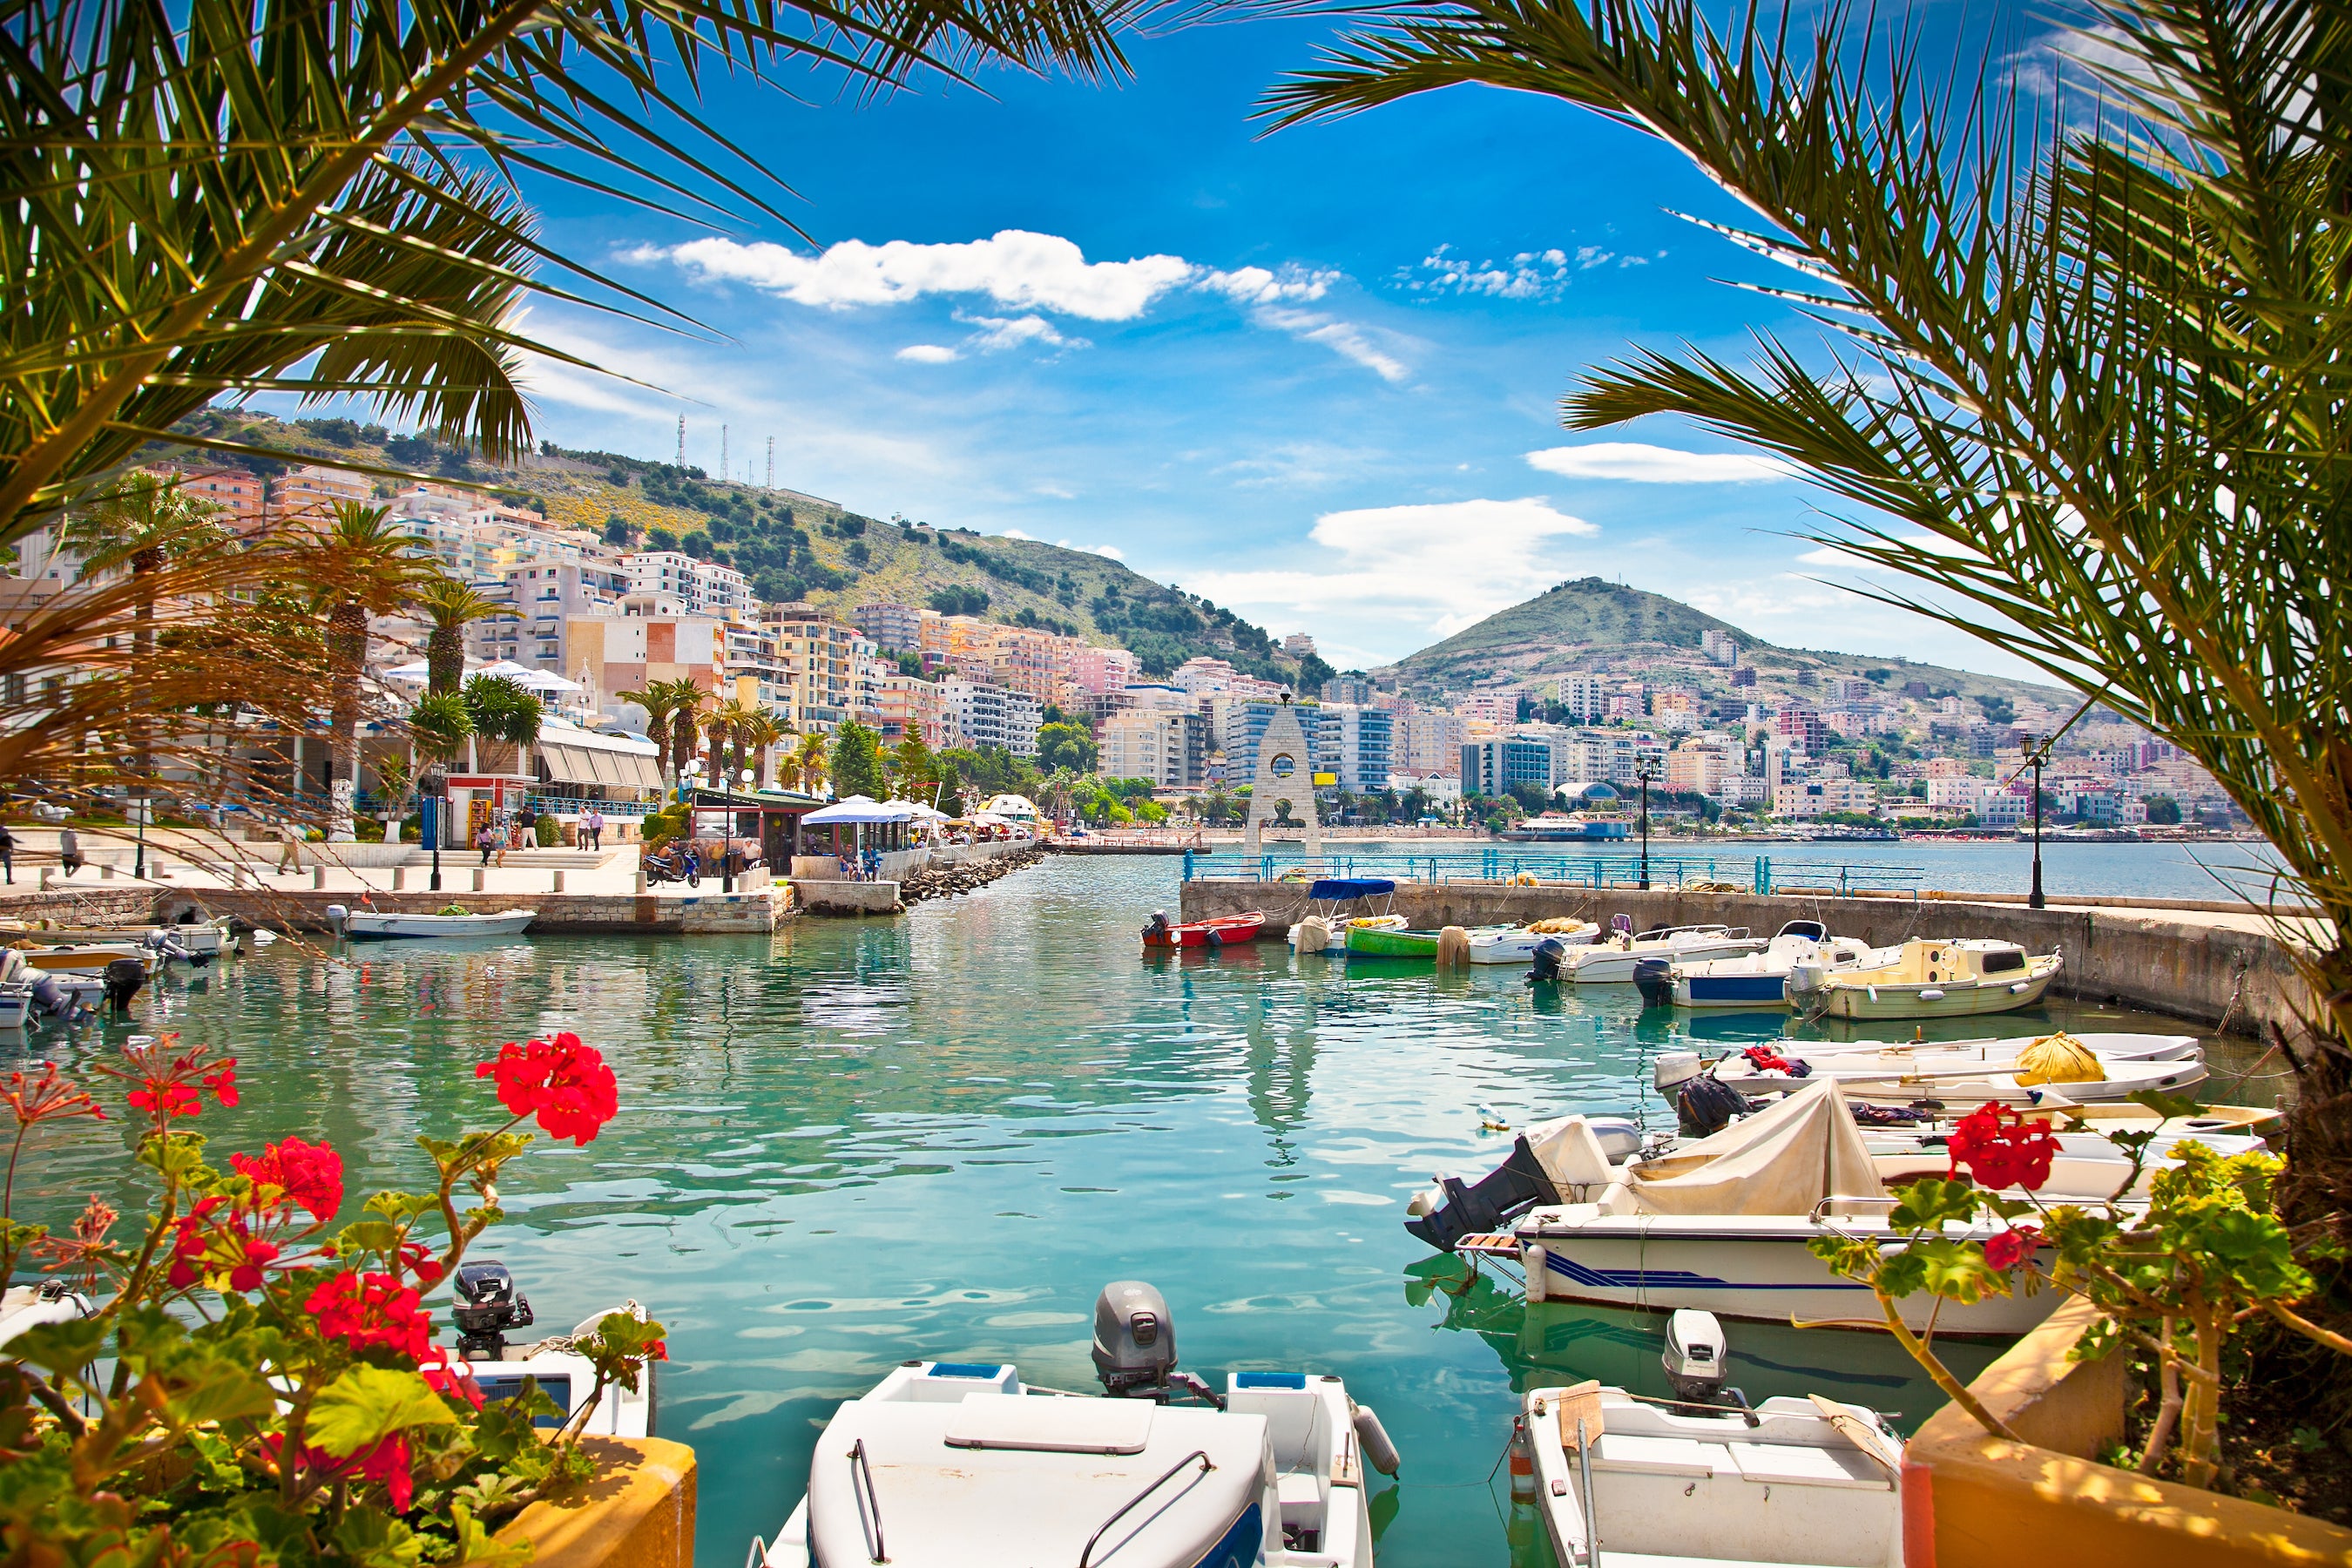 Move aside Greece: lower prices await across the border, including in the port of Saranda (above)